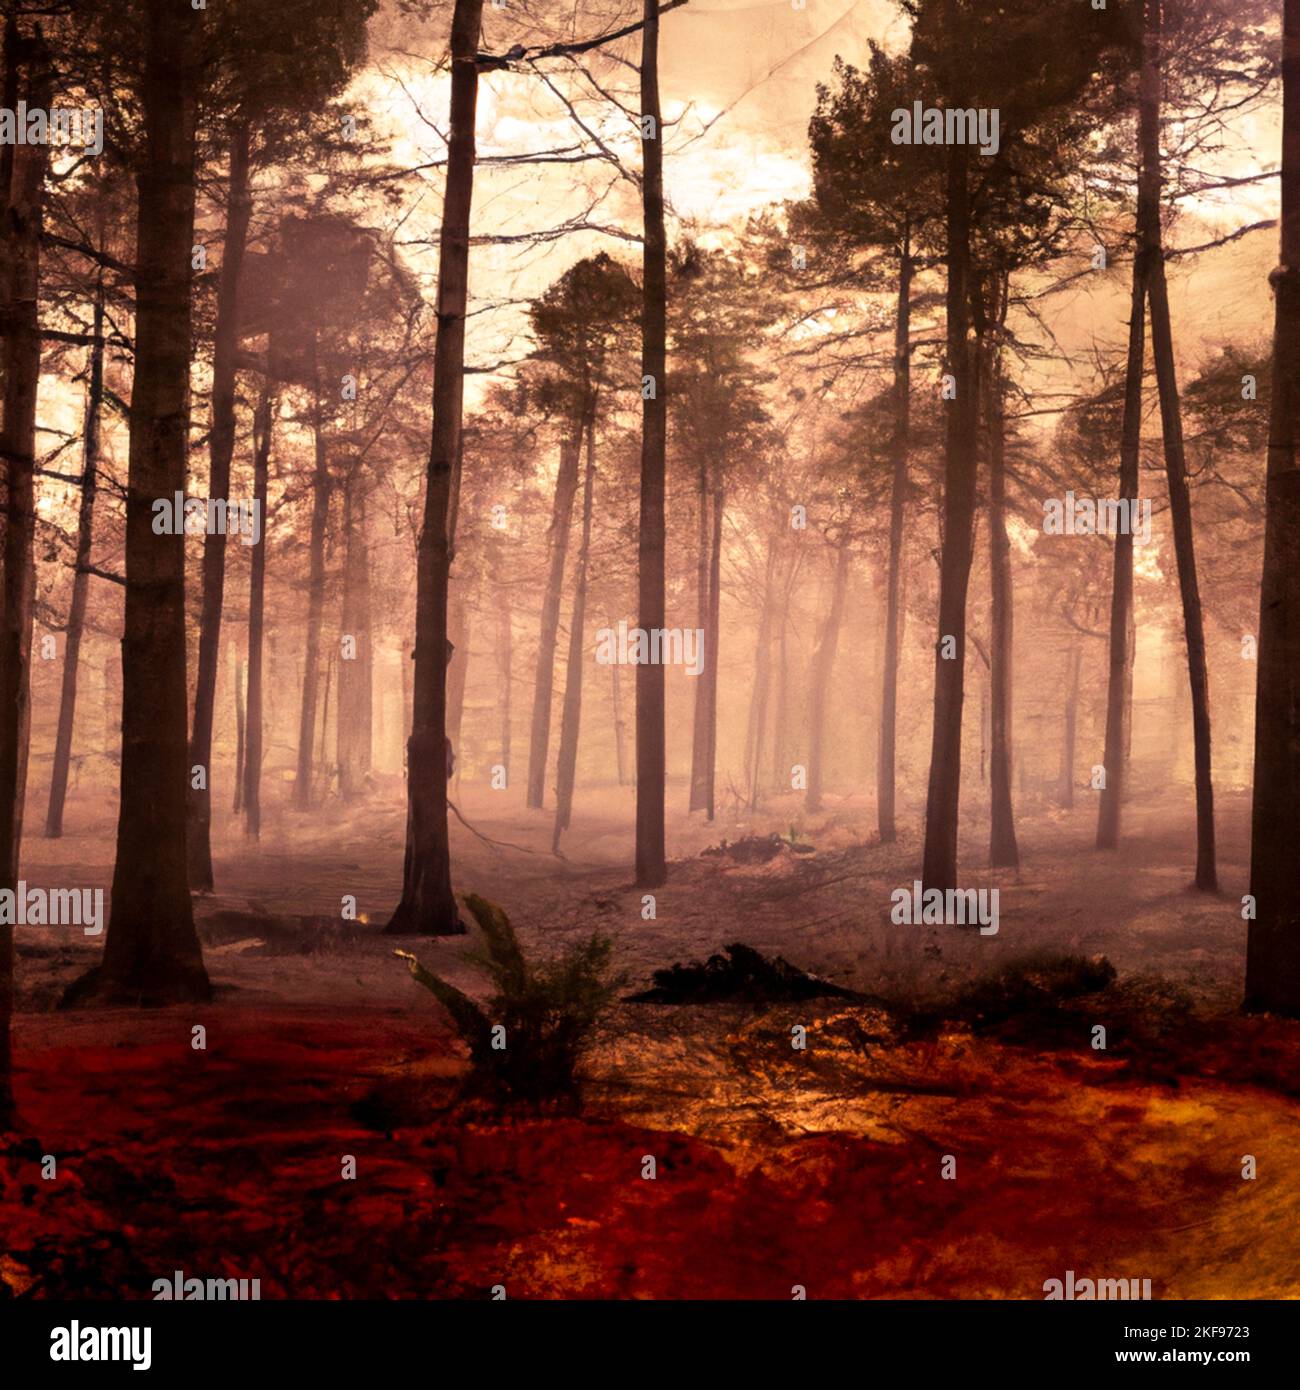 France, Paris on 2022-11-06. Digital illustration of a mega forest fire caused by the drought and heatwave generated by climate change. Image created Stock Photo